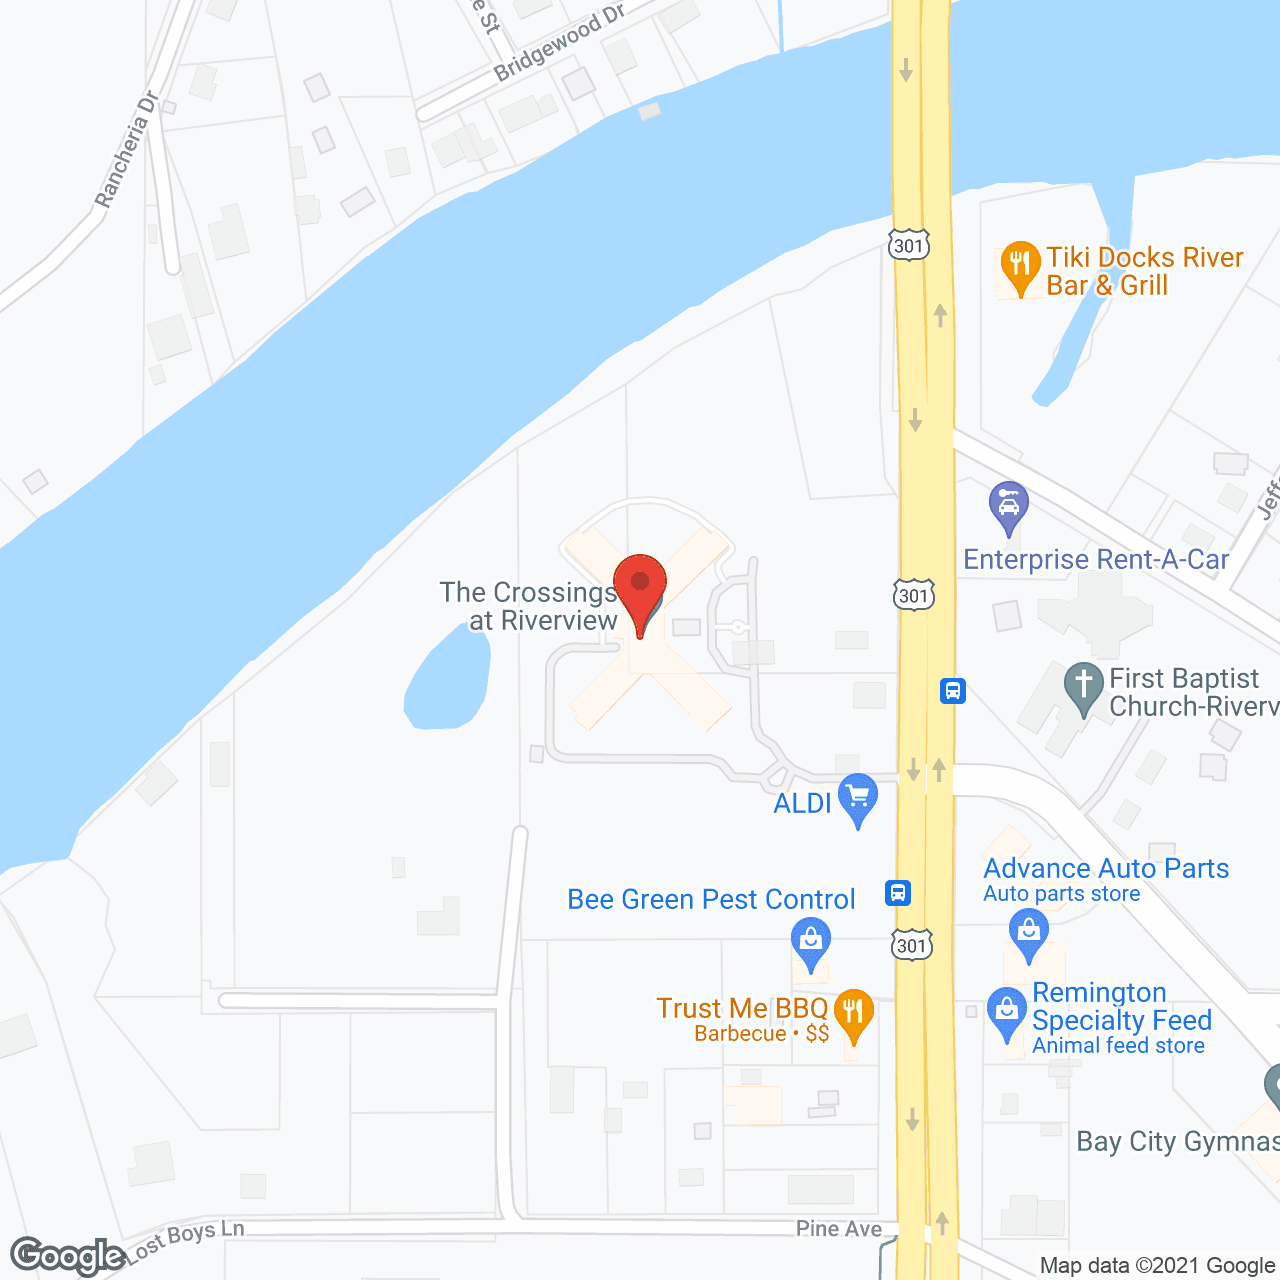 The Crossings at Riverview in google map